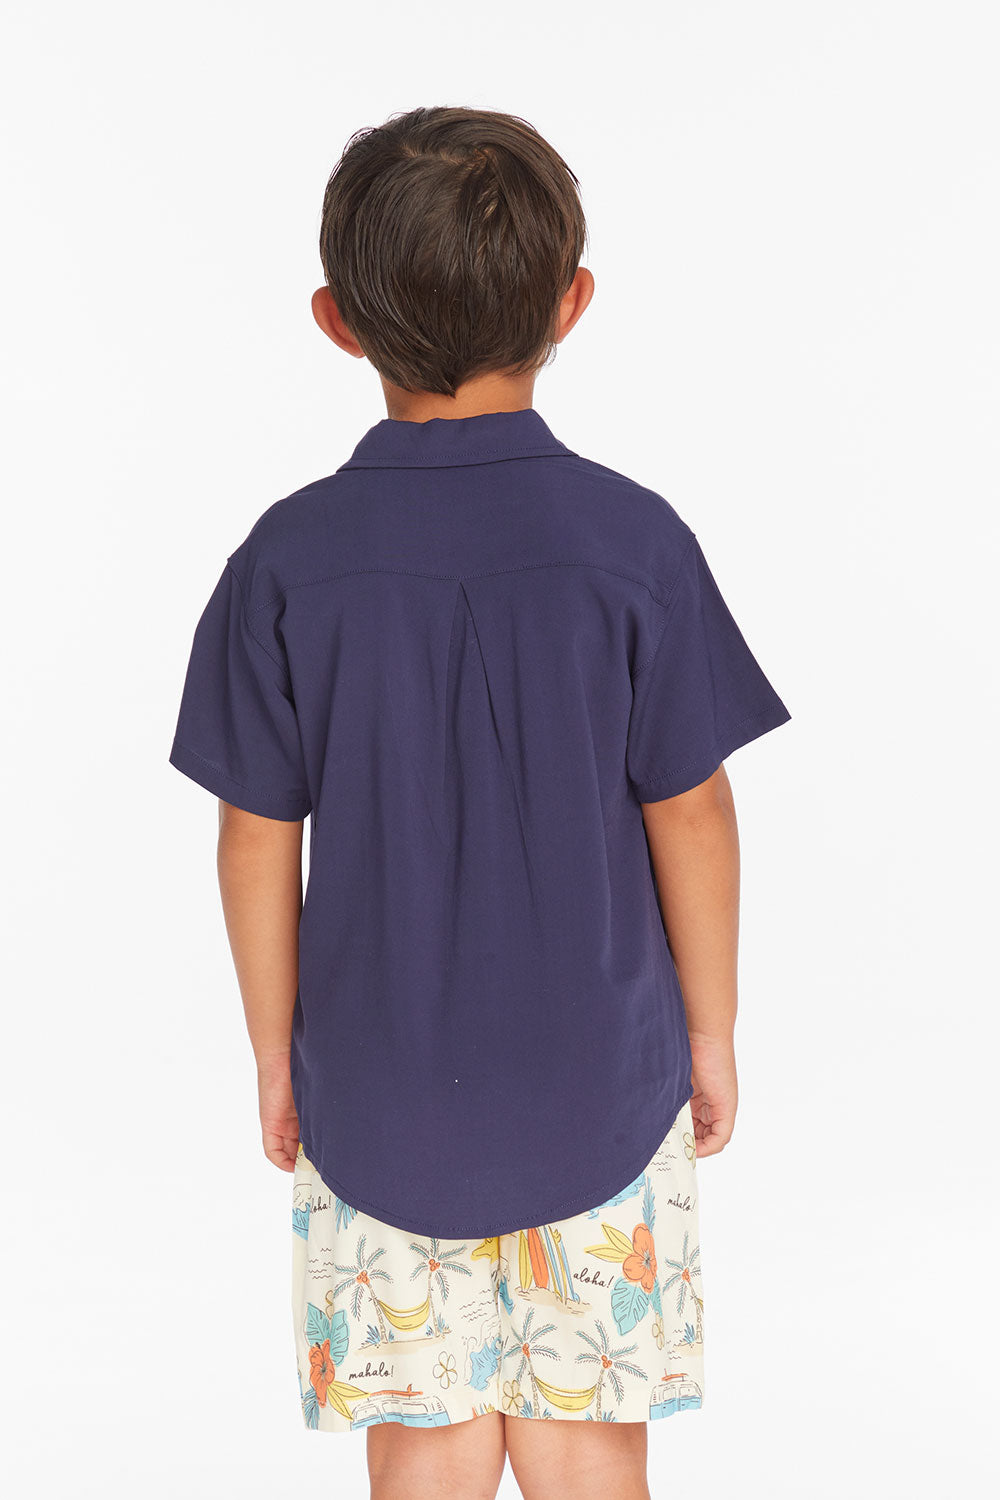 Collared Sapphire Blue Button Down Boys Shirt Boys chaserbrand